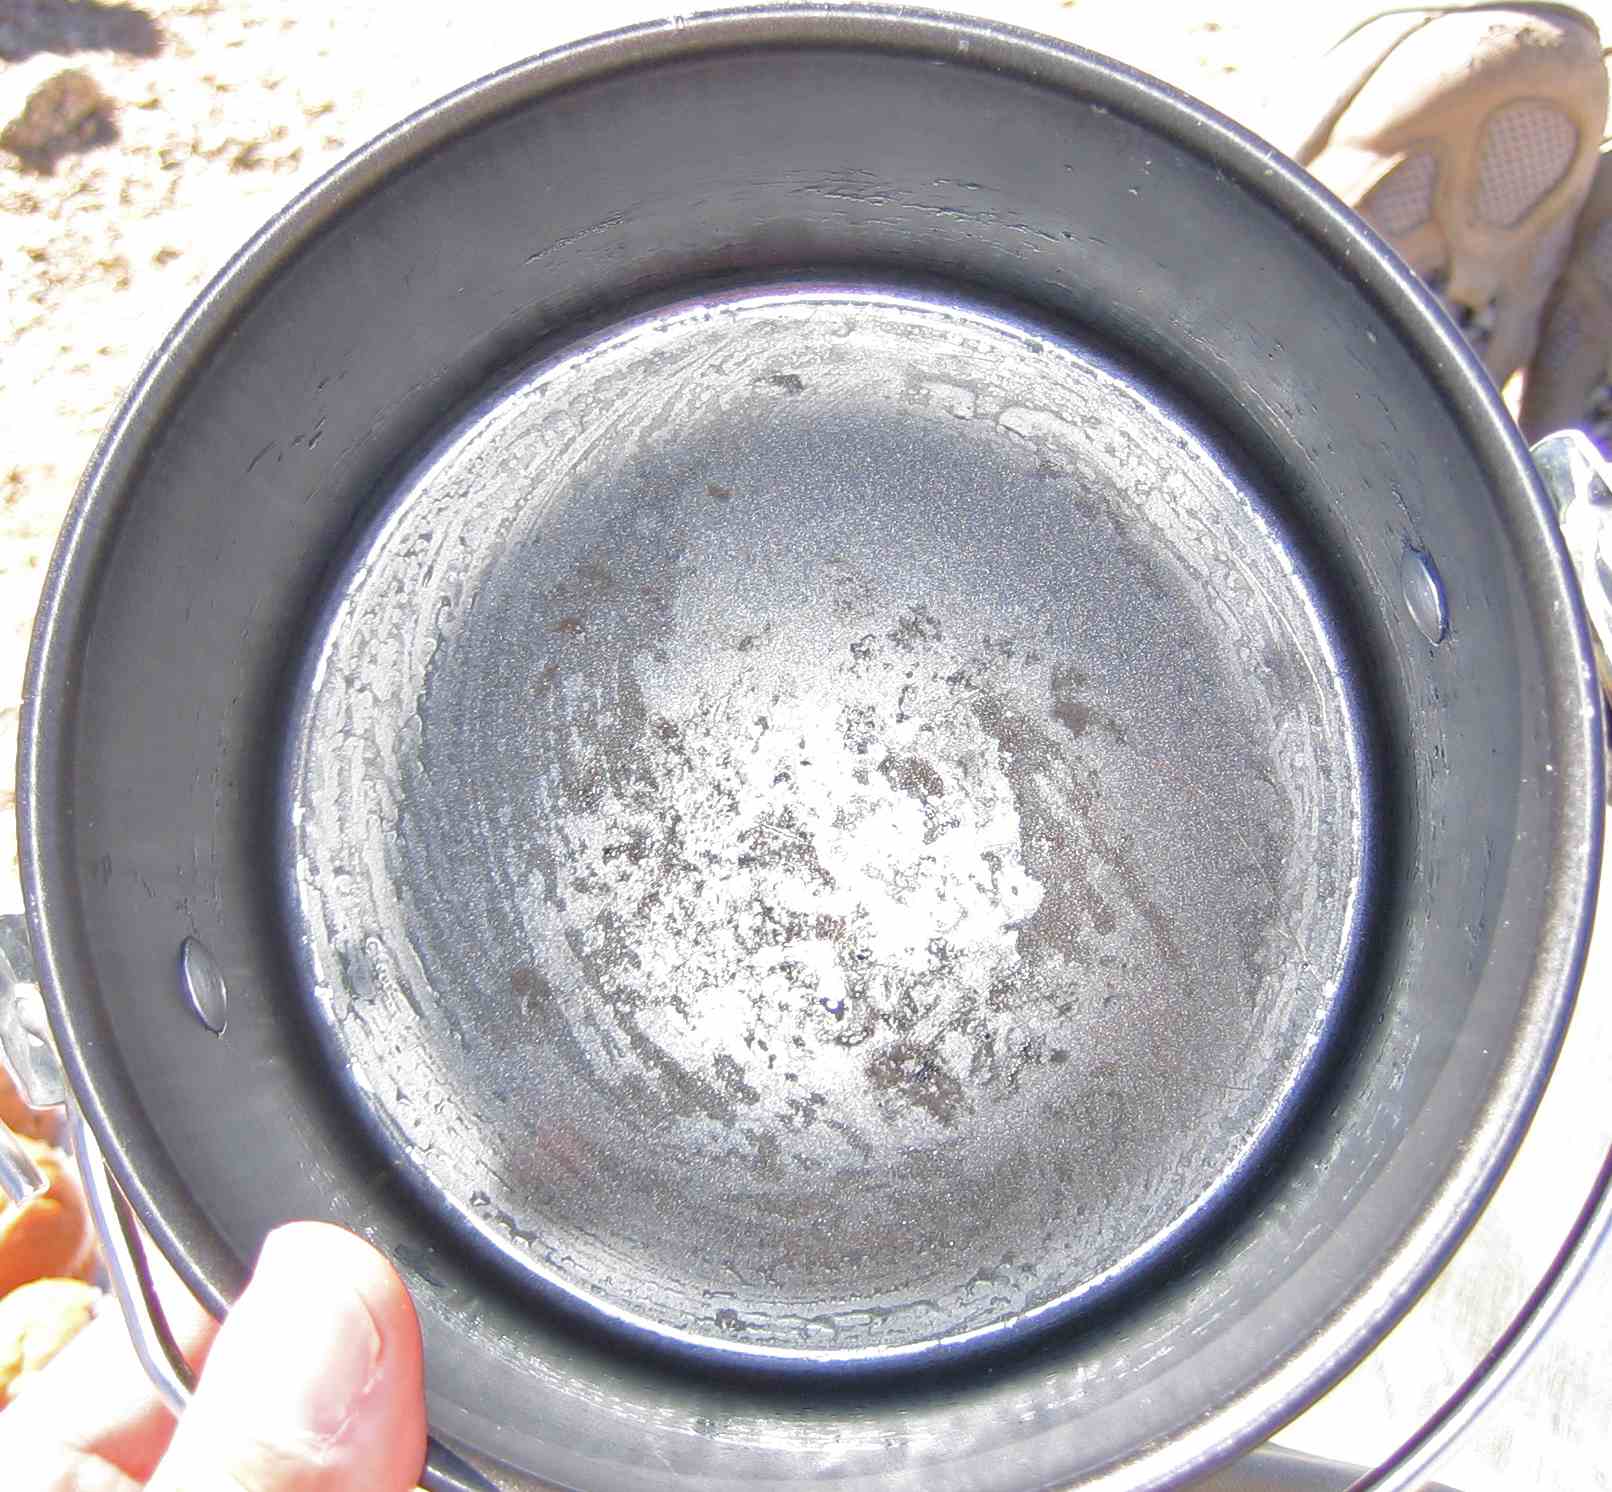 Egg pan after cleaning